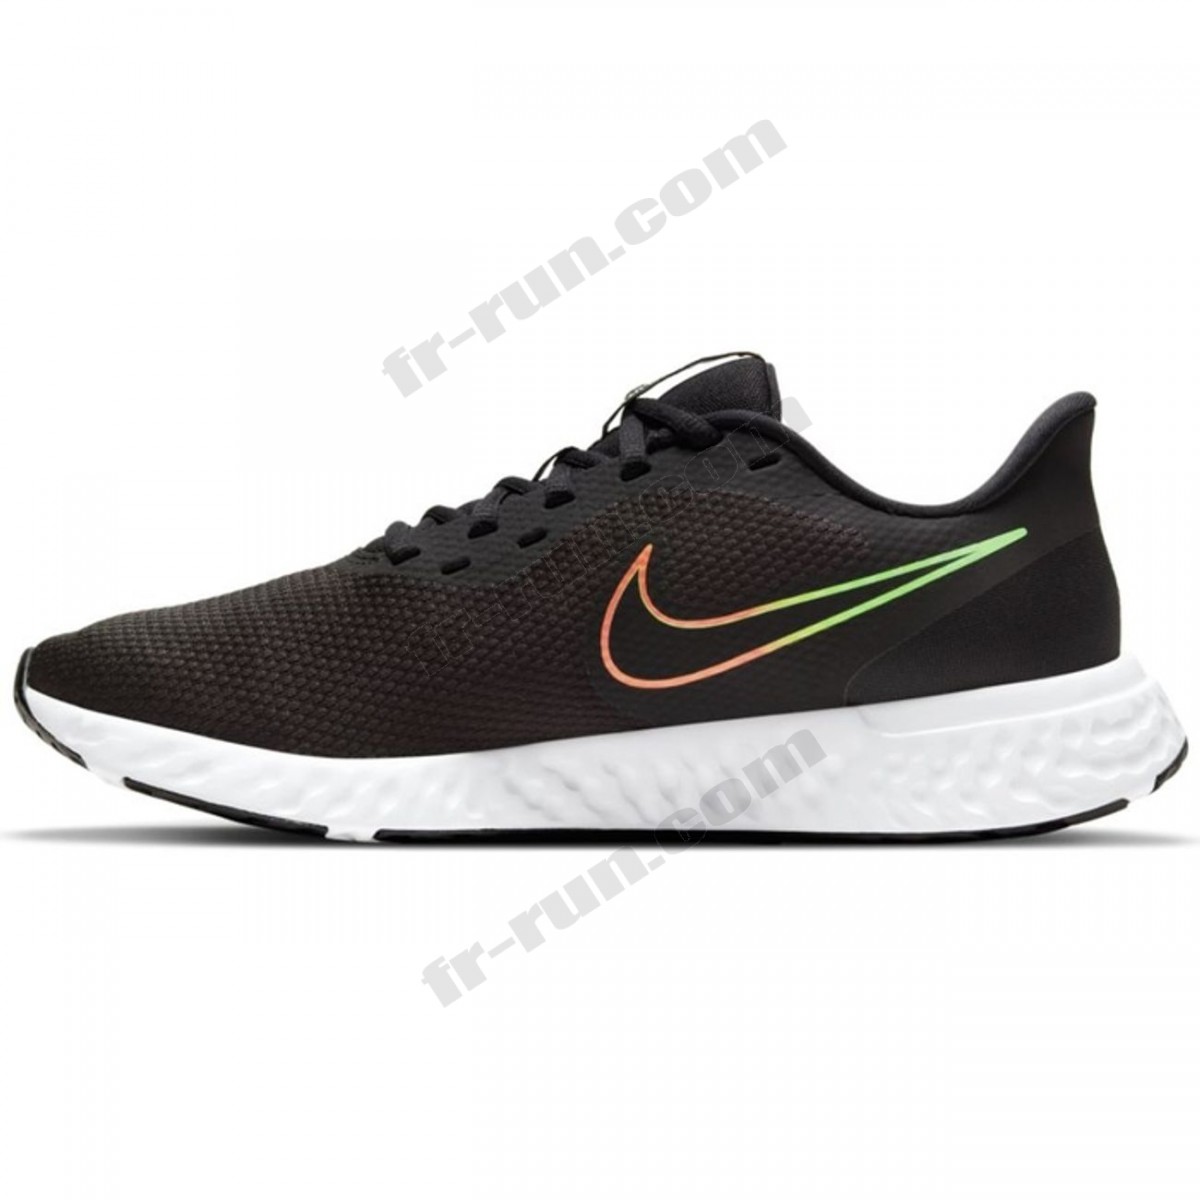 Nike/CHAUSSURES BASSES running homme NIKE NIKE REVOLUTION 5 √ Nouveau style √ Soldes - -1